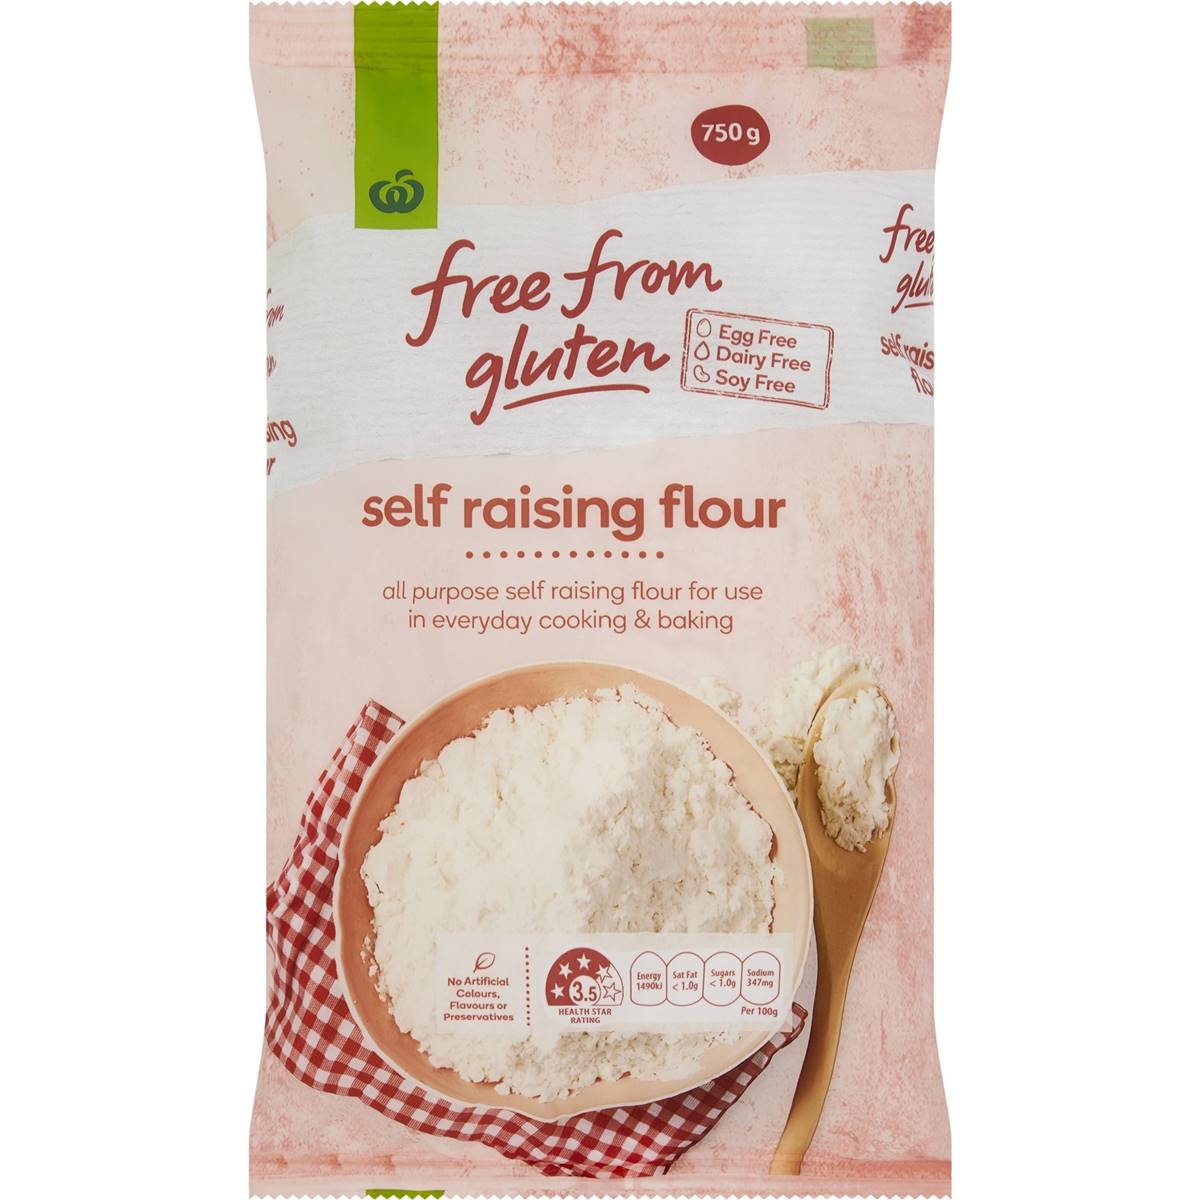 Calories In Woolworths Free From Gluten Self Raising Flour Calcount